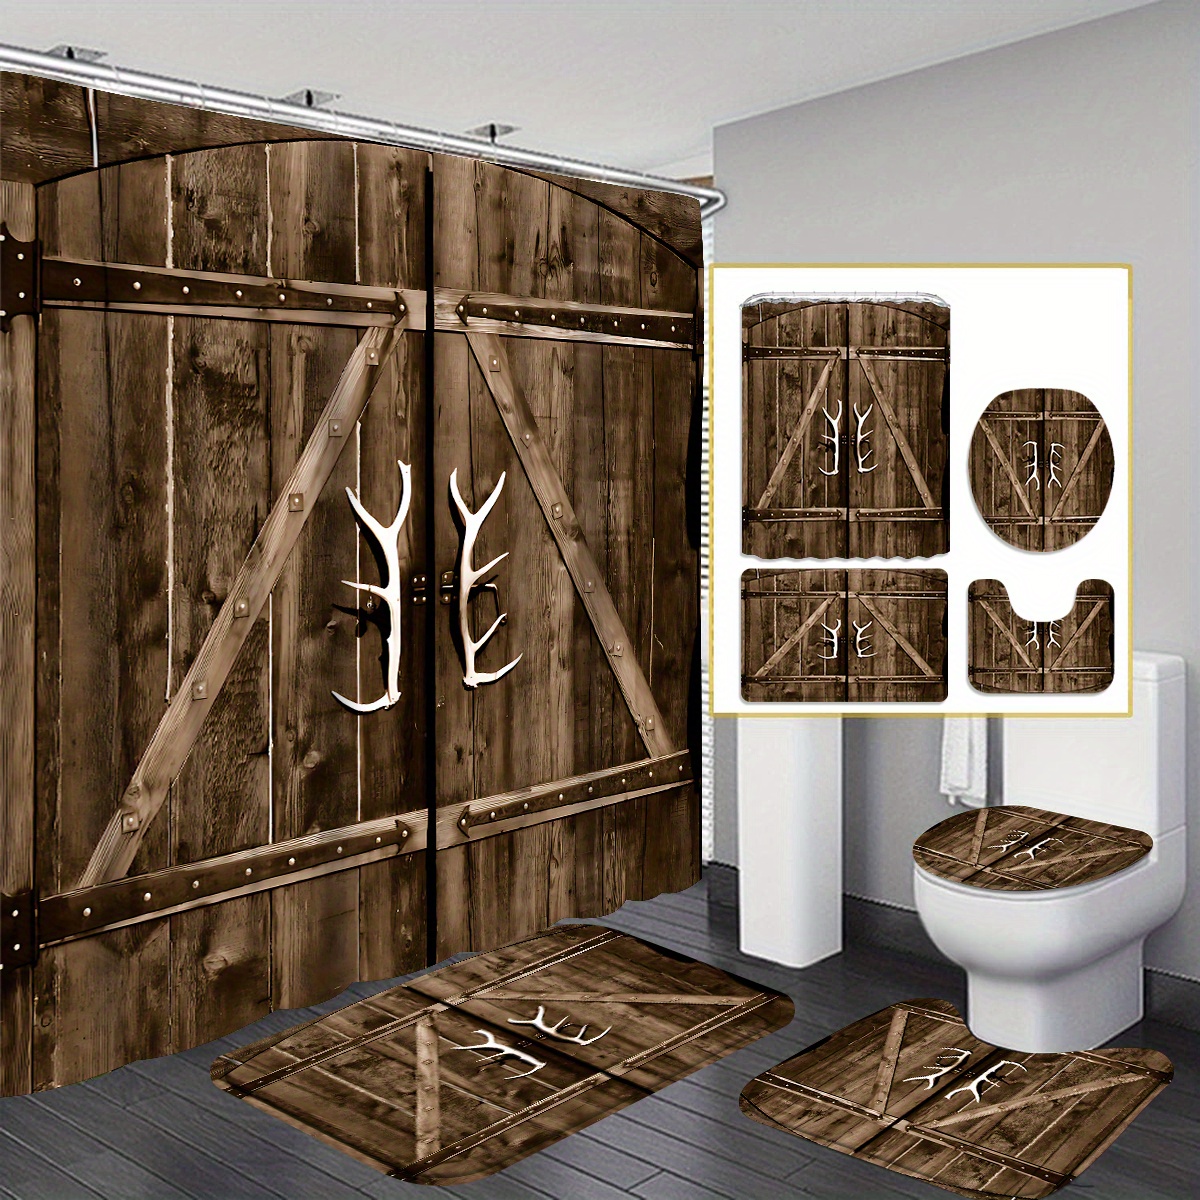 

4pcs Wooden Door Antler Handle Shower Curtain Gift Modern Home Bathroom Decoration Curtain And Toilet Floor Mat 3-piece Set With 12 Shower Curtain Hooks